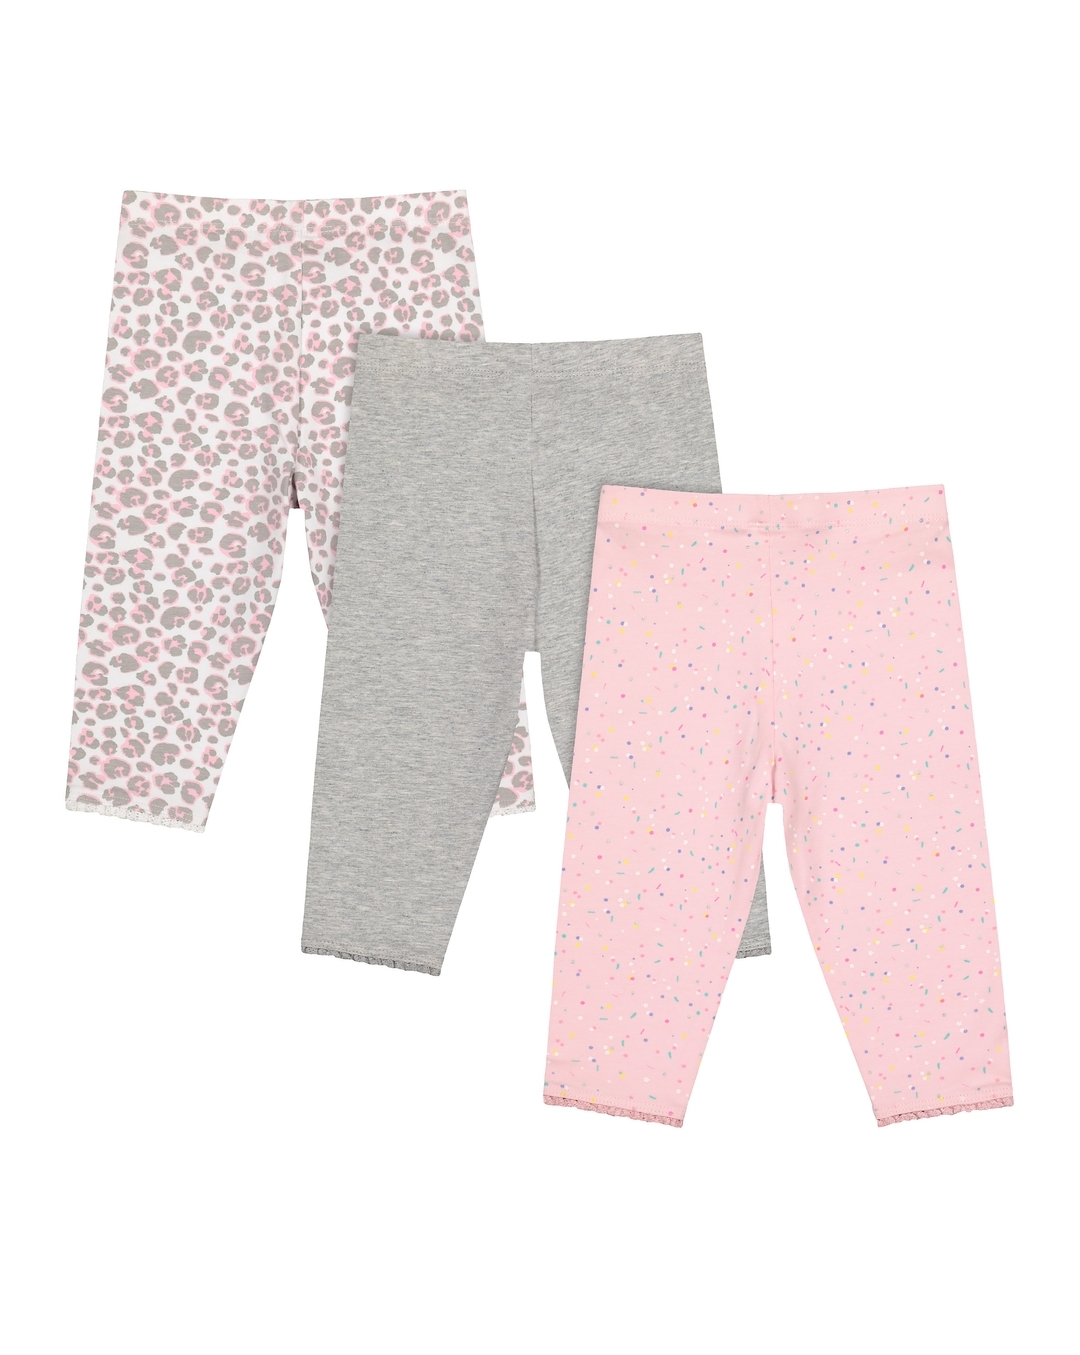 Buy Pink Youth Leggings Online In India - Etsy India